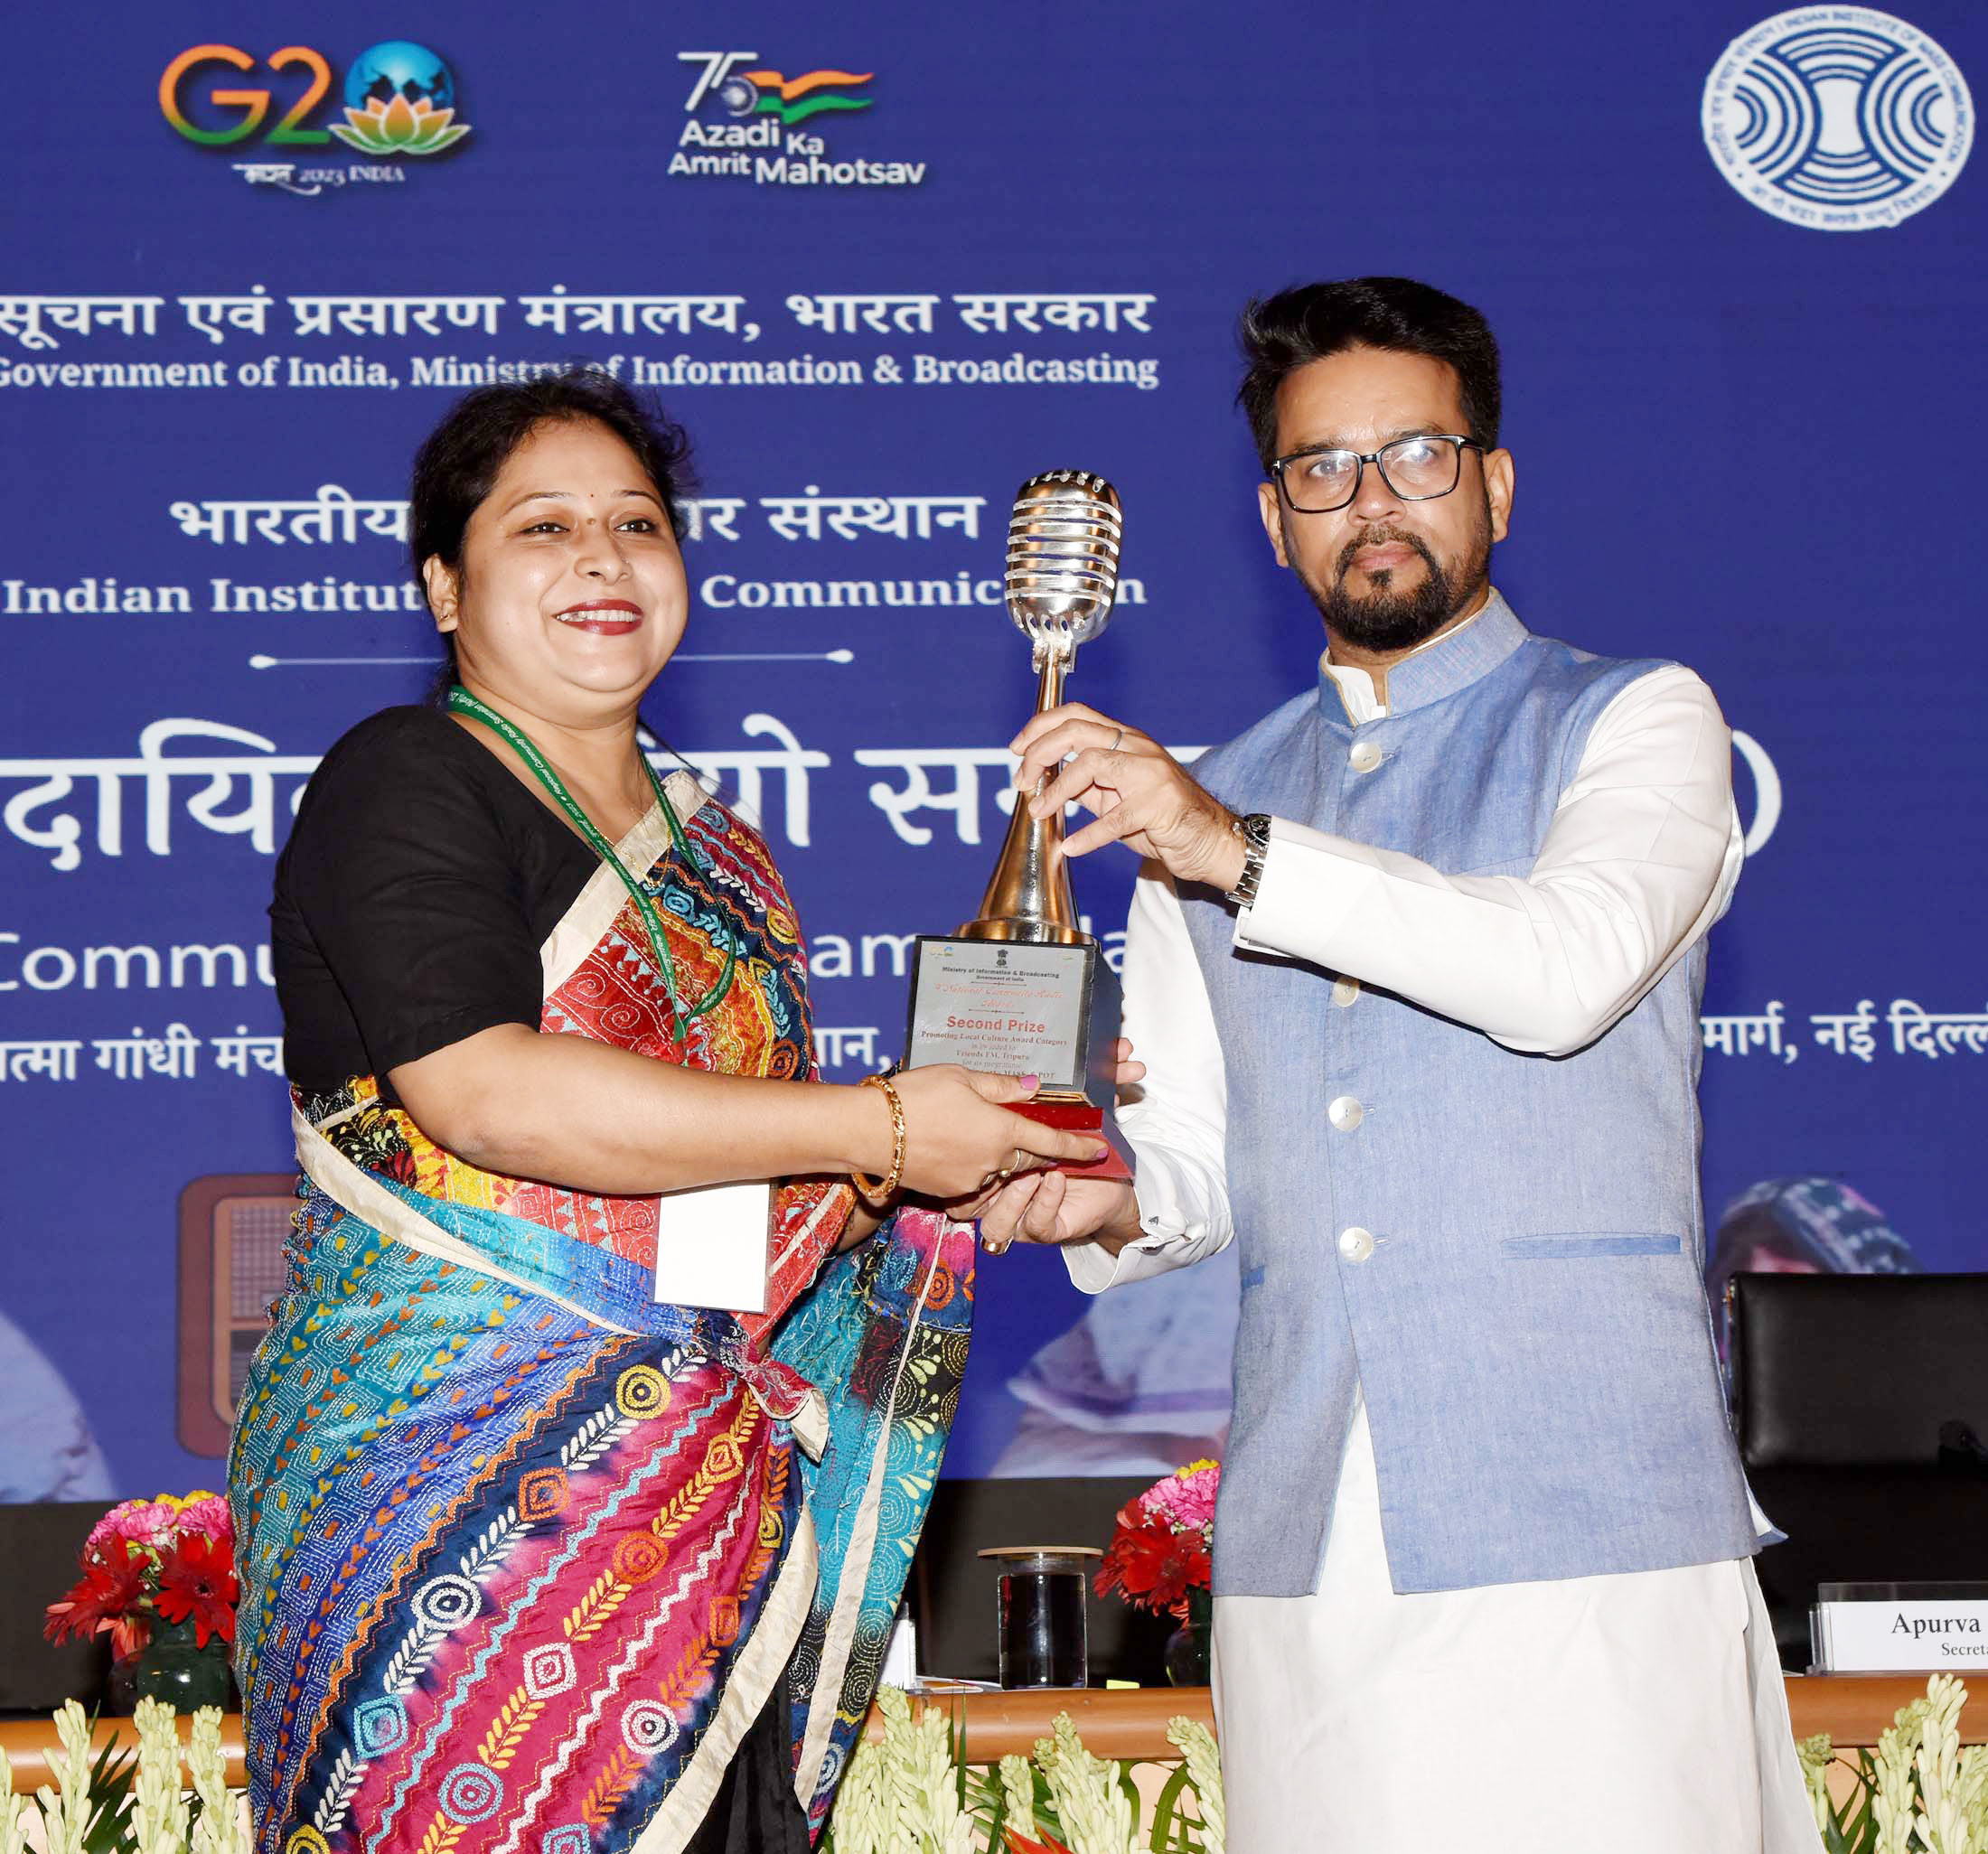 The Union Minister for Information & Broadcasting, Youth Affairs and Sports, Shri Anurag Singh Thakur conferring National Community Radio Awards at inauguration event of Regional Community Radio Sammelan (North) at IIMC, in New Delhi on July 23, 2023.